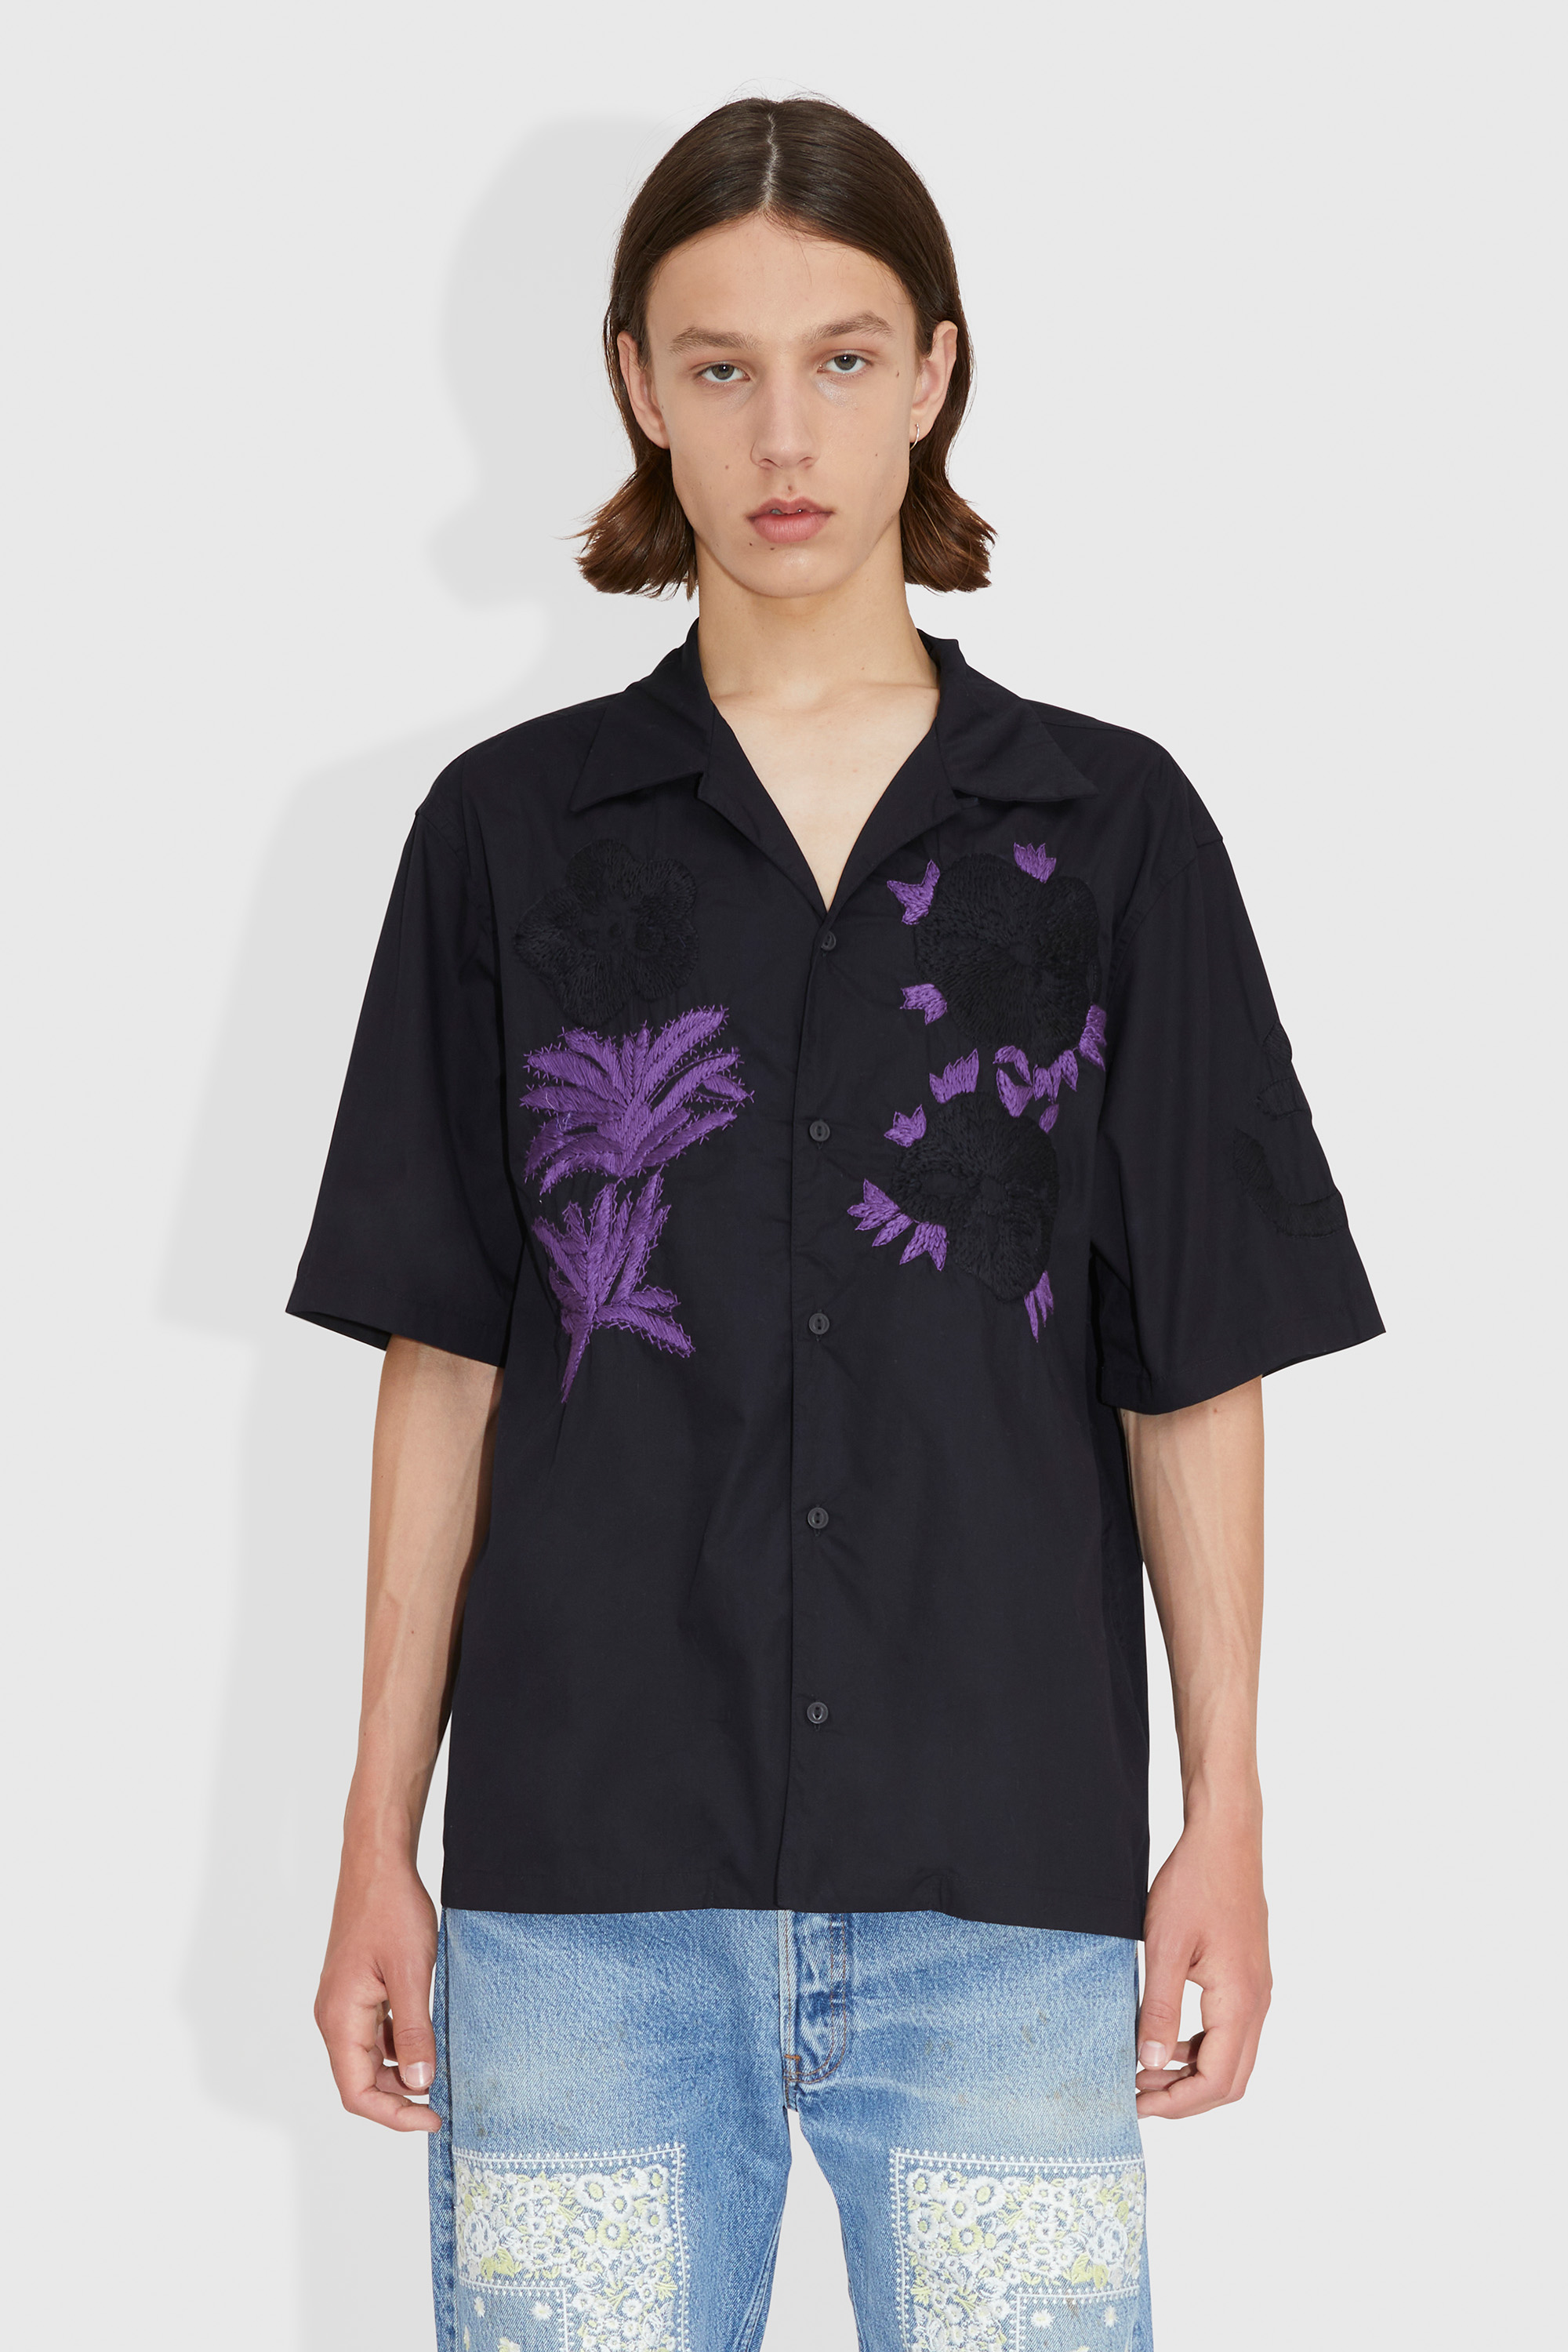 NOMA t.d. Flower & Cactus Hand Embroidery Shirt Black | WoodWood.com